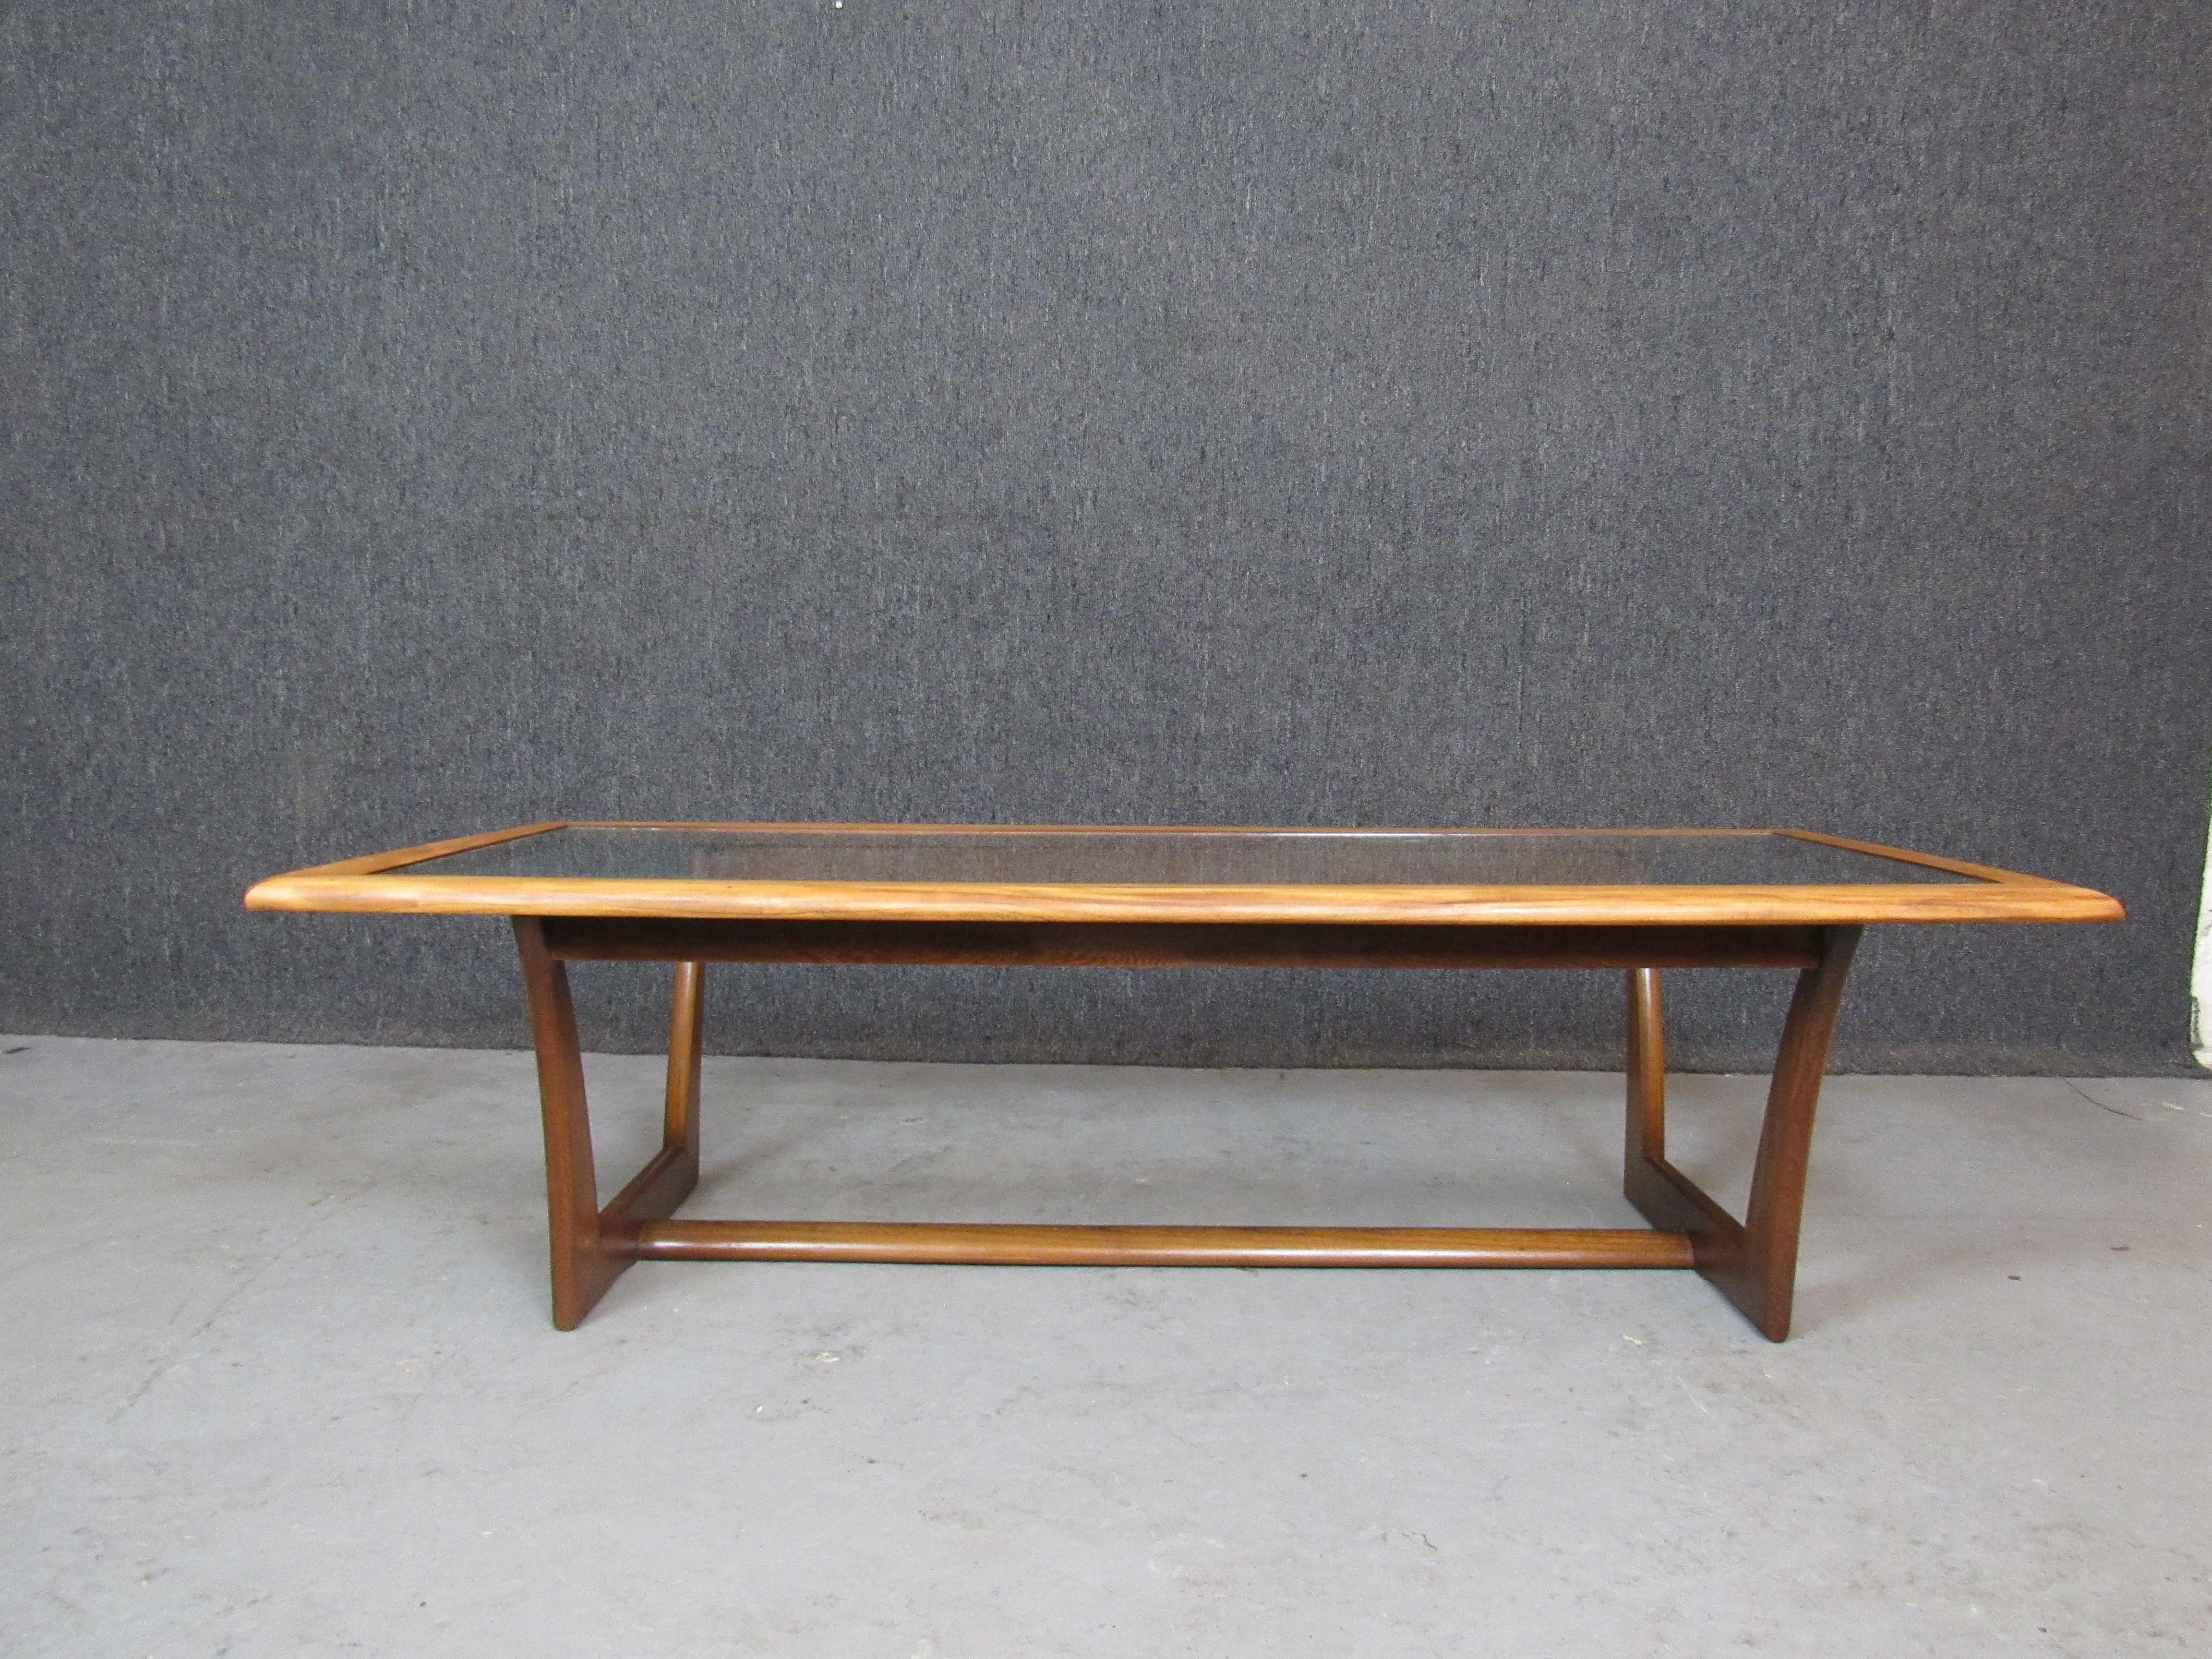 Carved Mid-Century Vintage American Oak & Glass Coffee Table